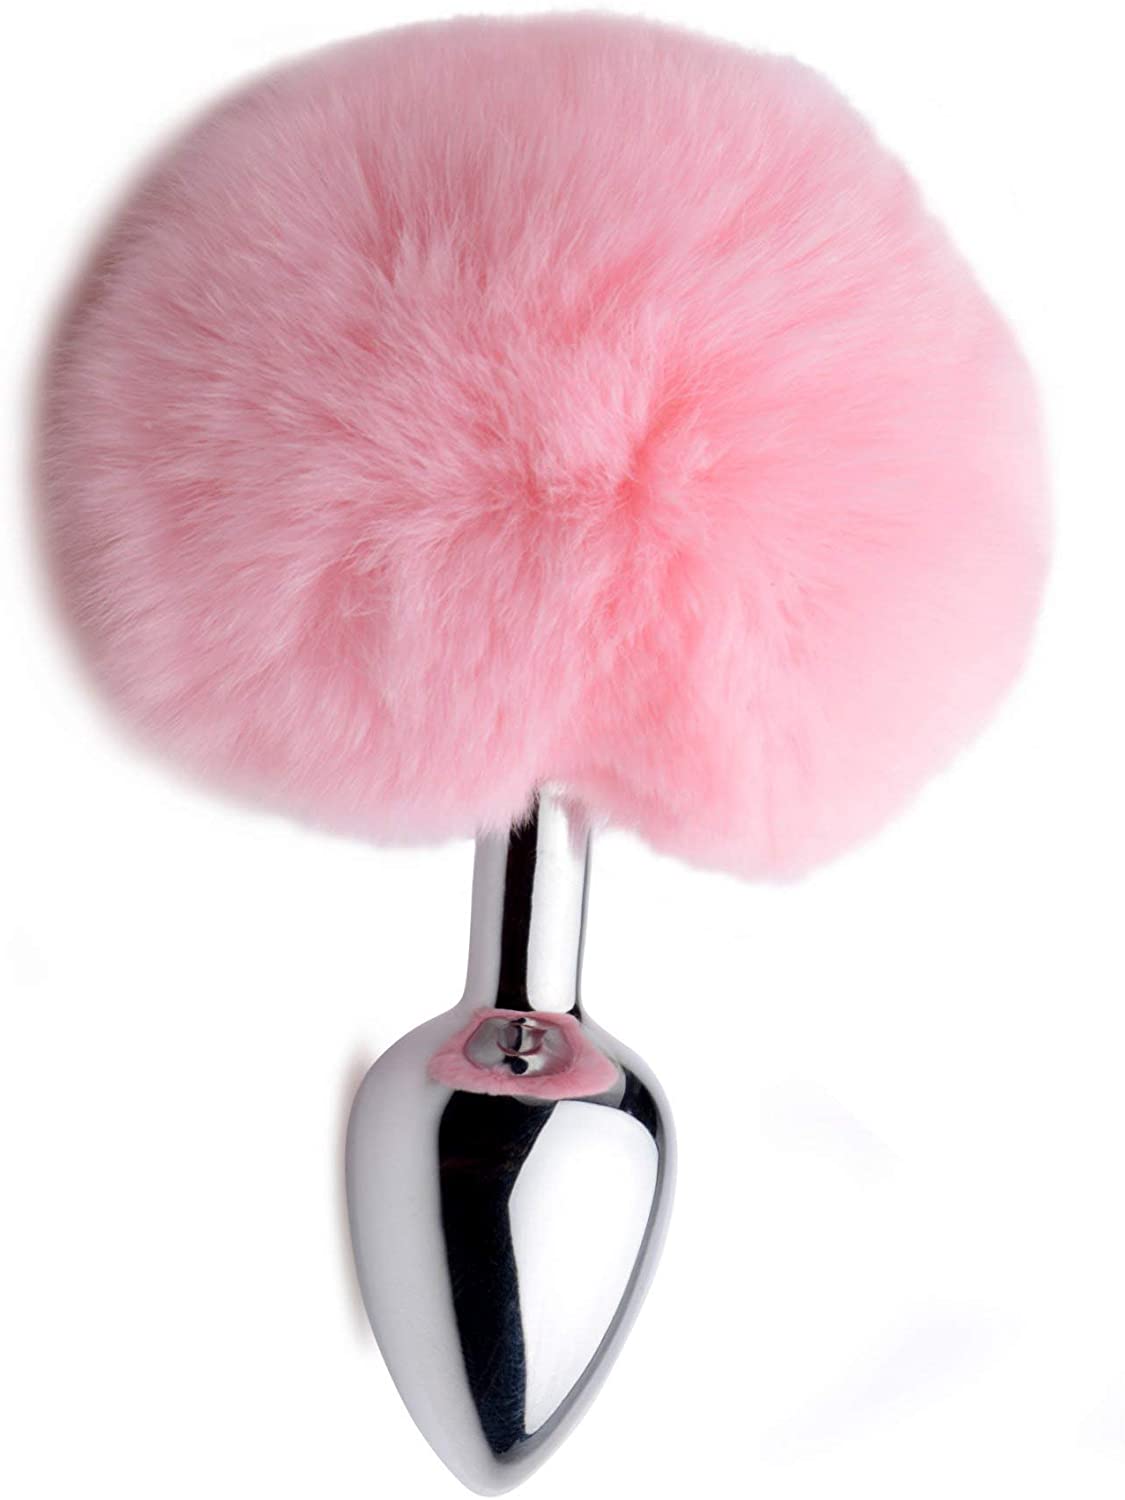 Tailz Pink Bunny Rabbit Anal Tail Plug, White Bunny Tail Anal Plug. AU$34.95... White Fluffer Bunny Tail Glass Anal Plug. Collection of Anal Plug Pleasure Tails, Tailz for all your animalistic needs, Cat Tails, Animal Tail Plugs, Luxury Quality Fetish Kink Plugs Australia Same Day Dispatch Duchess and Daisy Drop in..